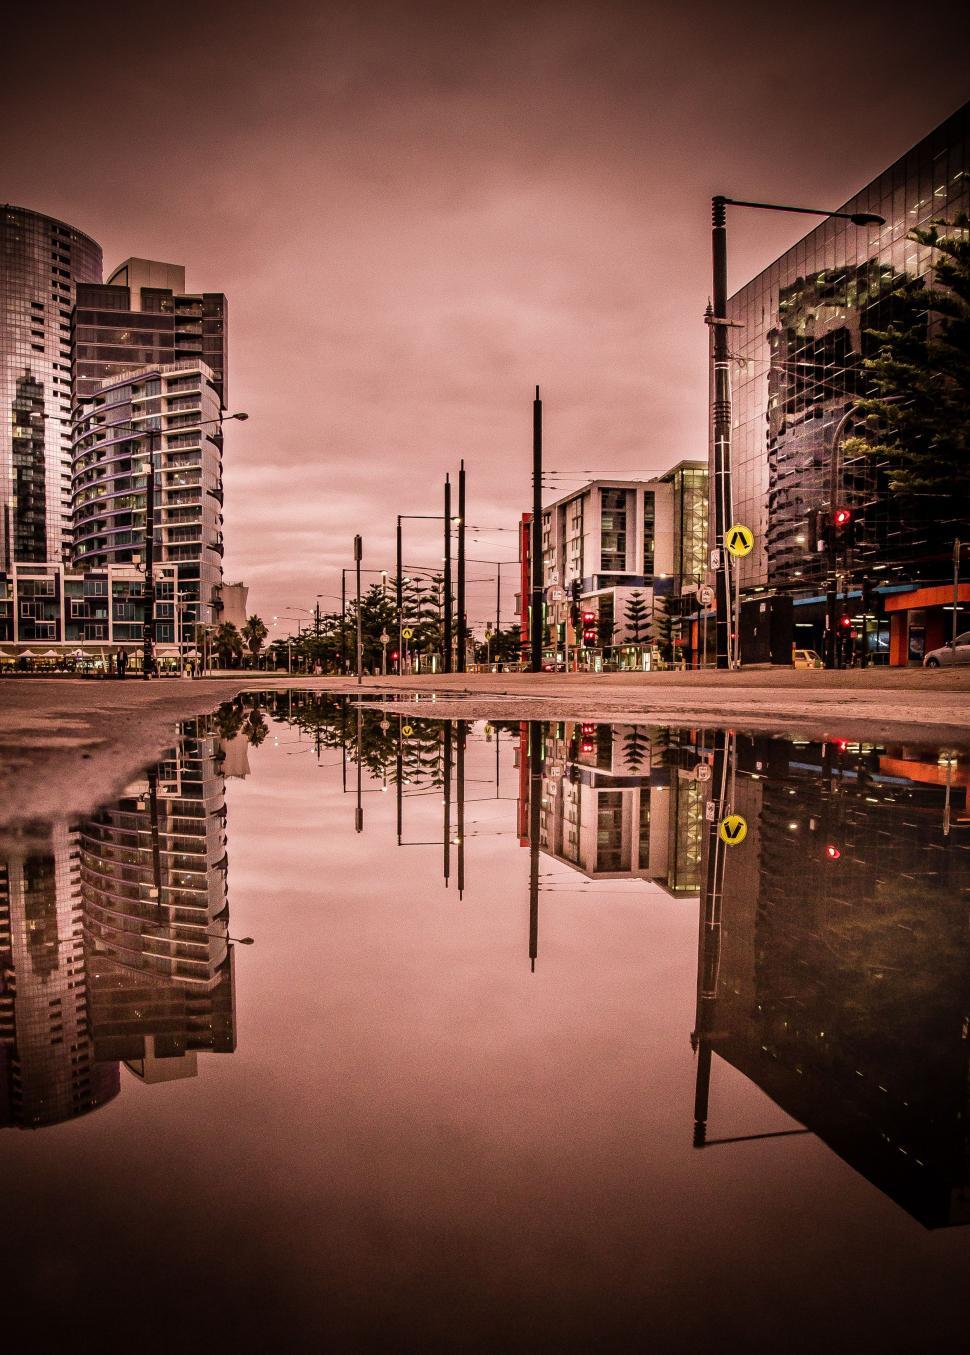 Free Image of Urban Buildings Reflection in Water Puddle 